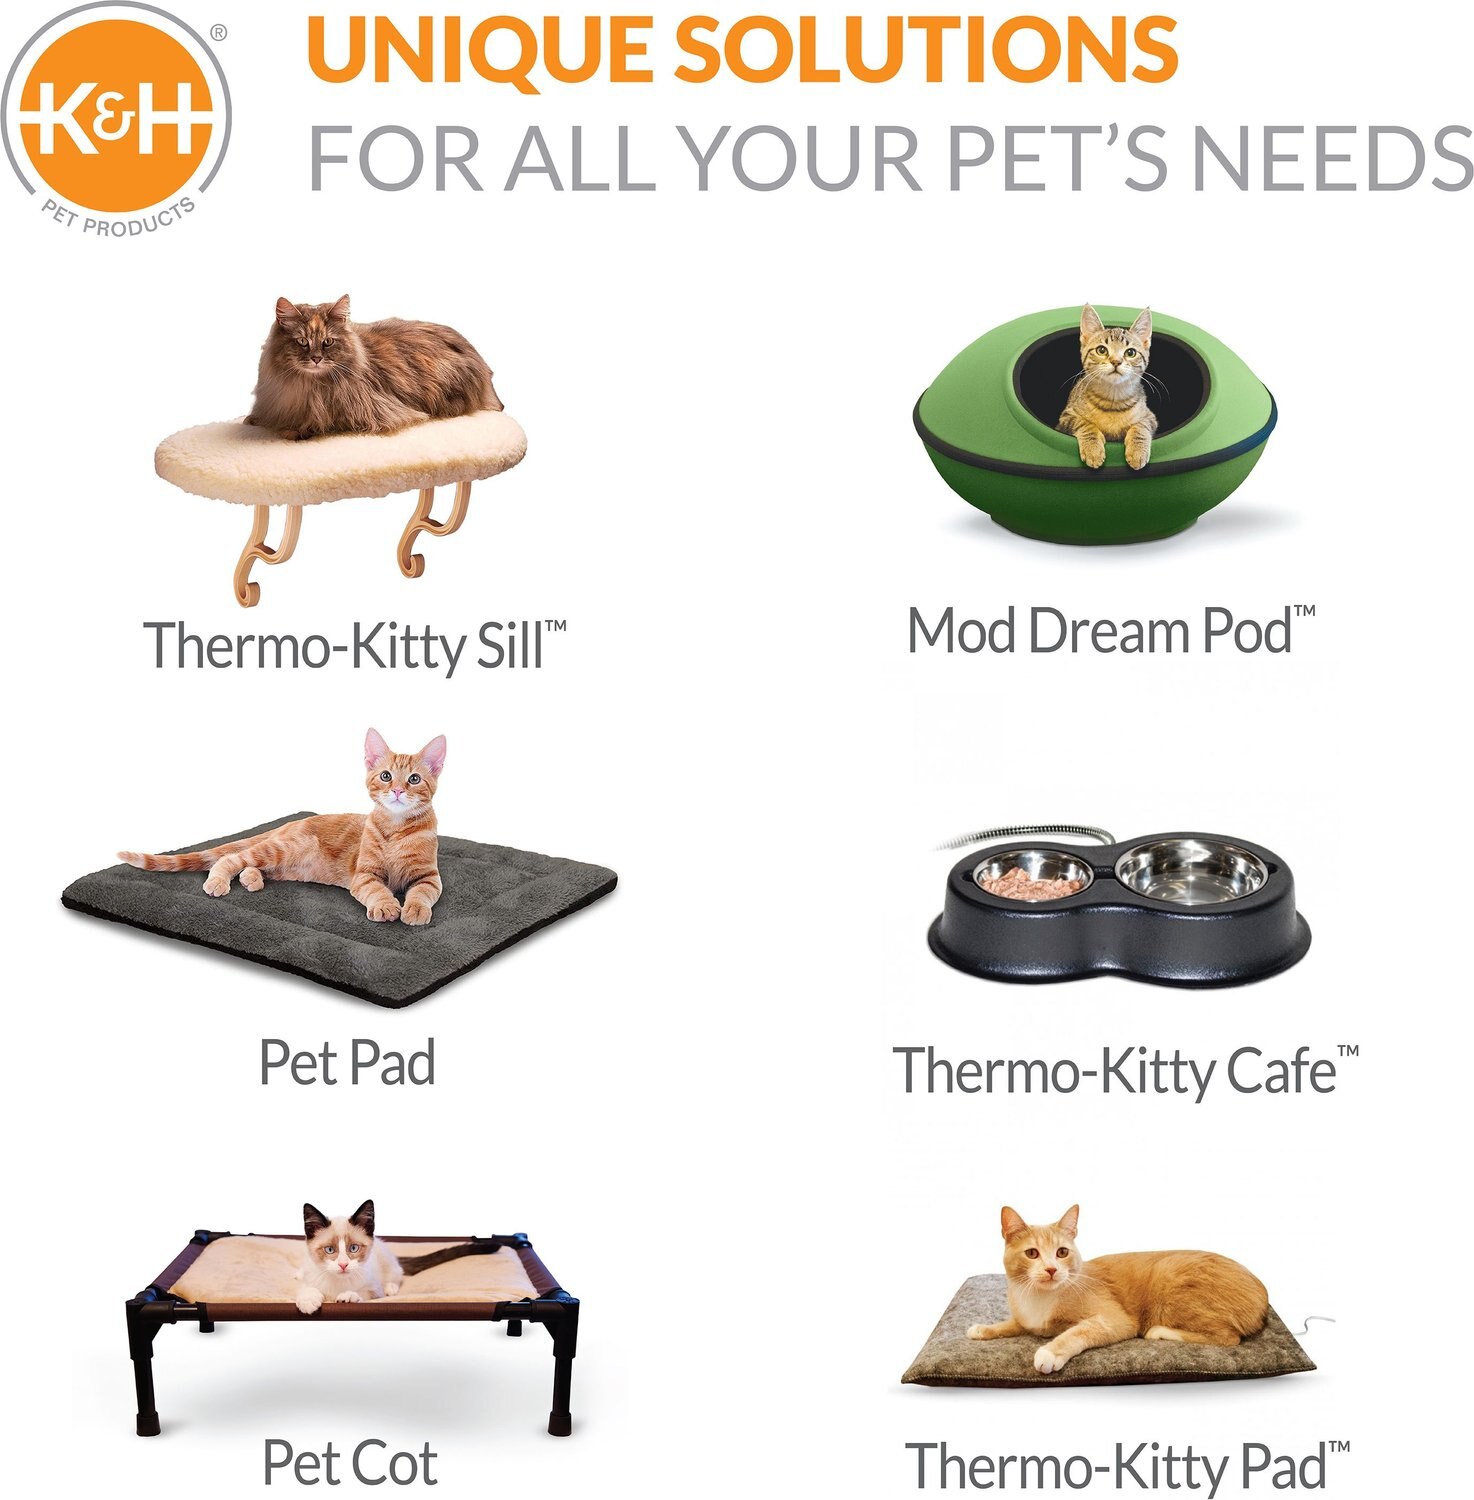 K&H PET PRODUCTS Mod Thermo-Kitty Shelter, Tan - Chewy.com